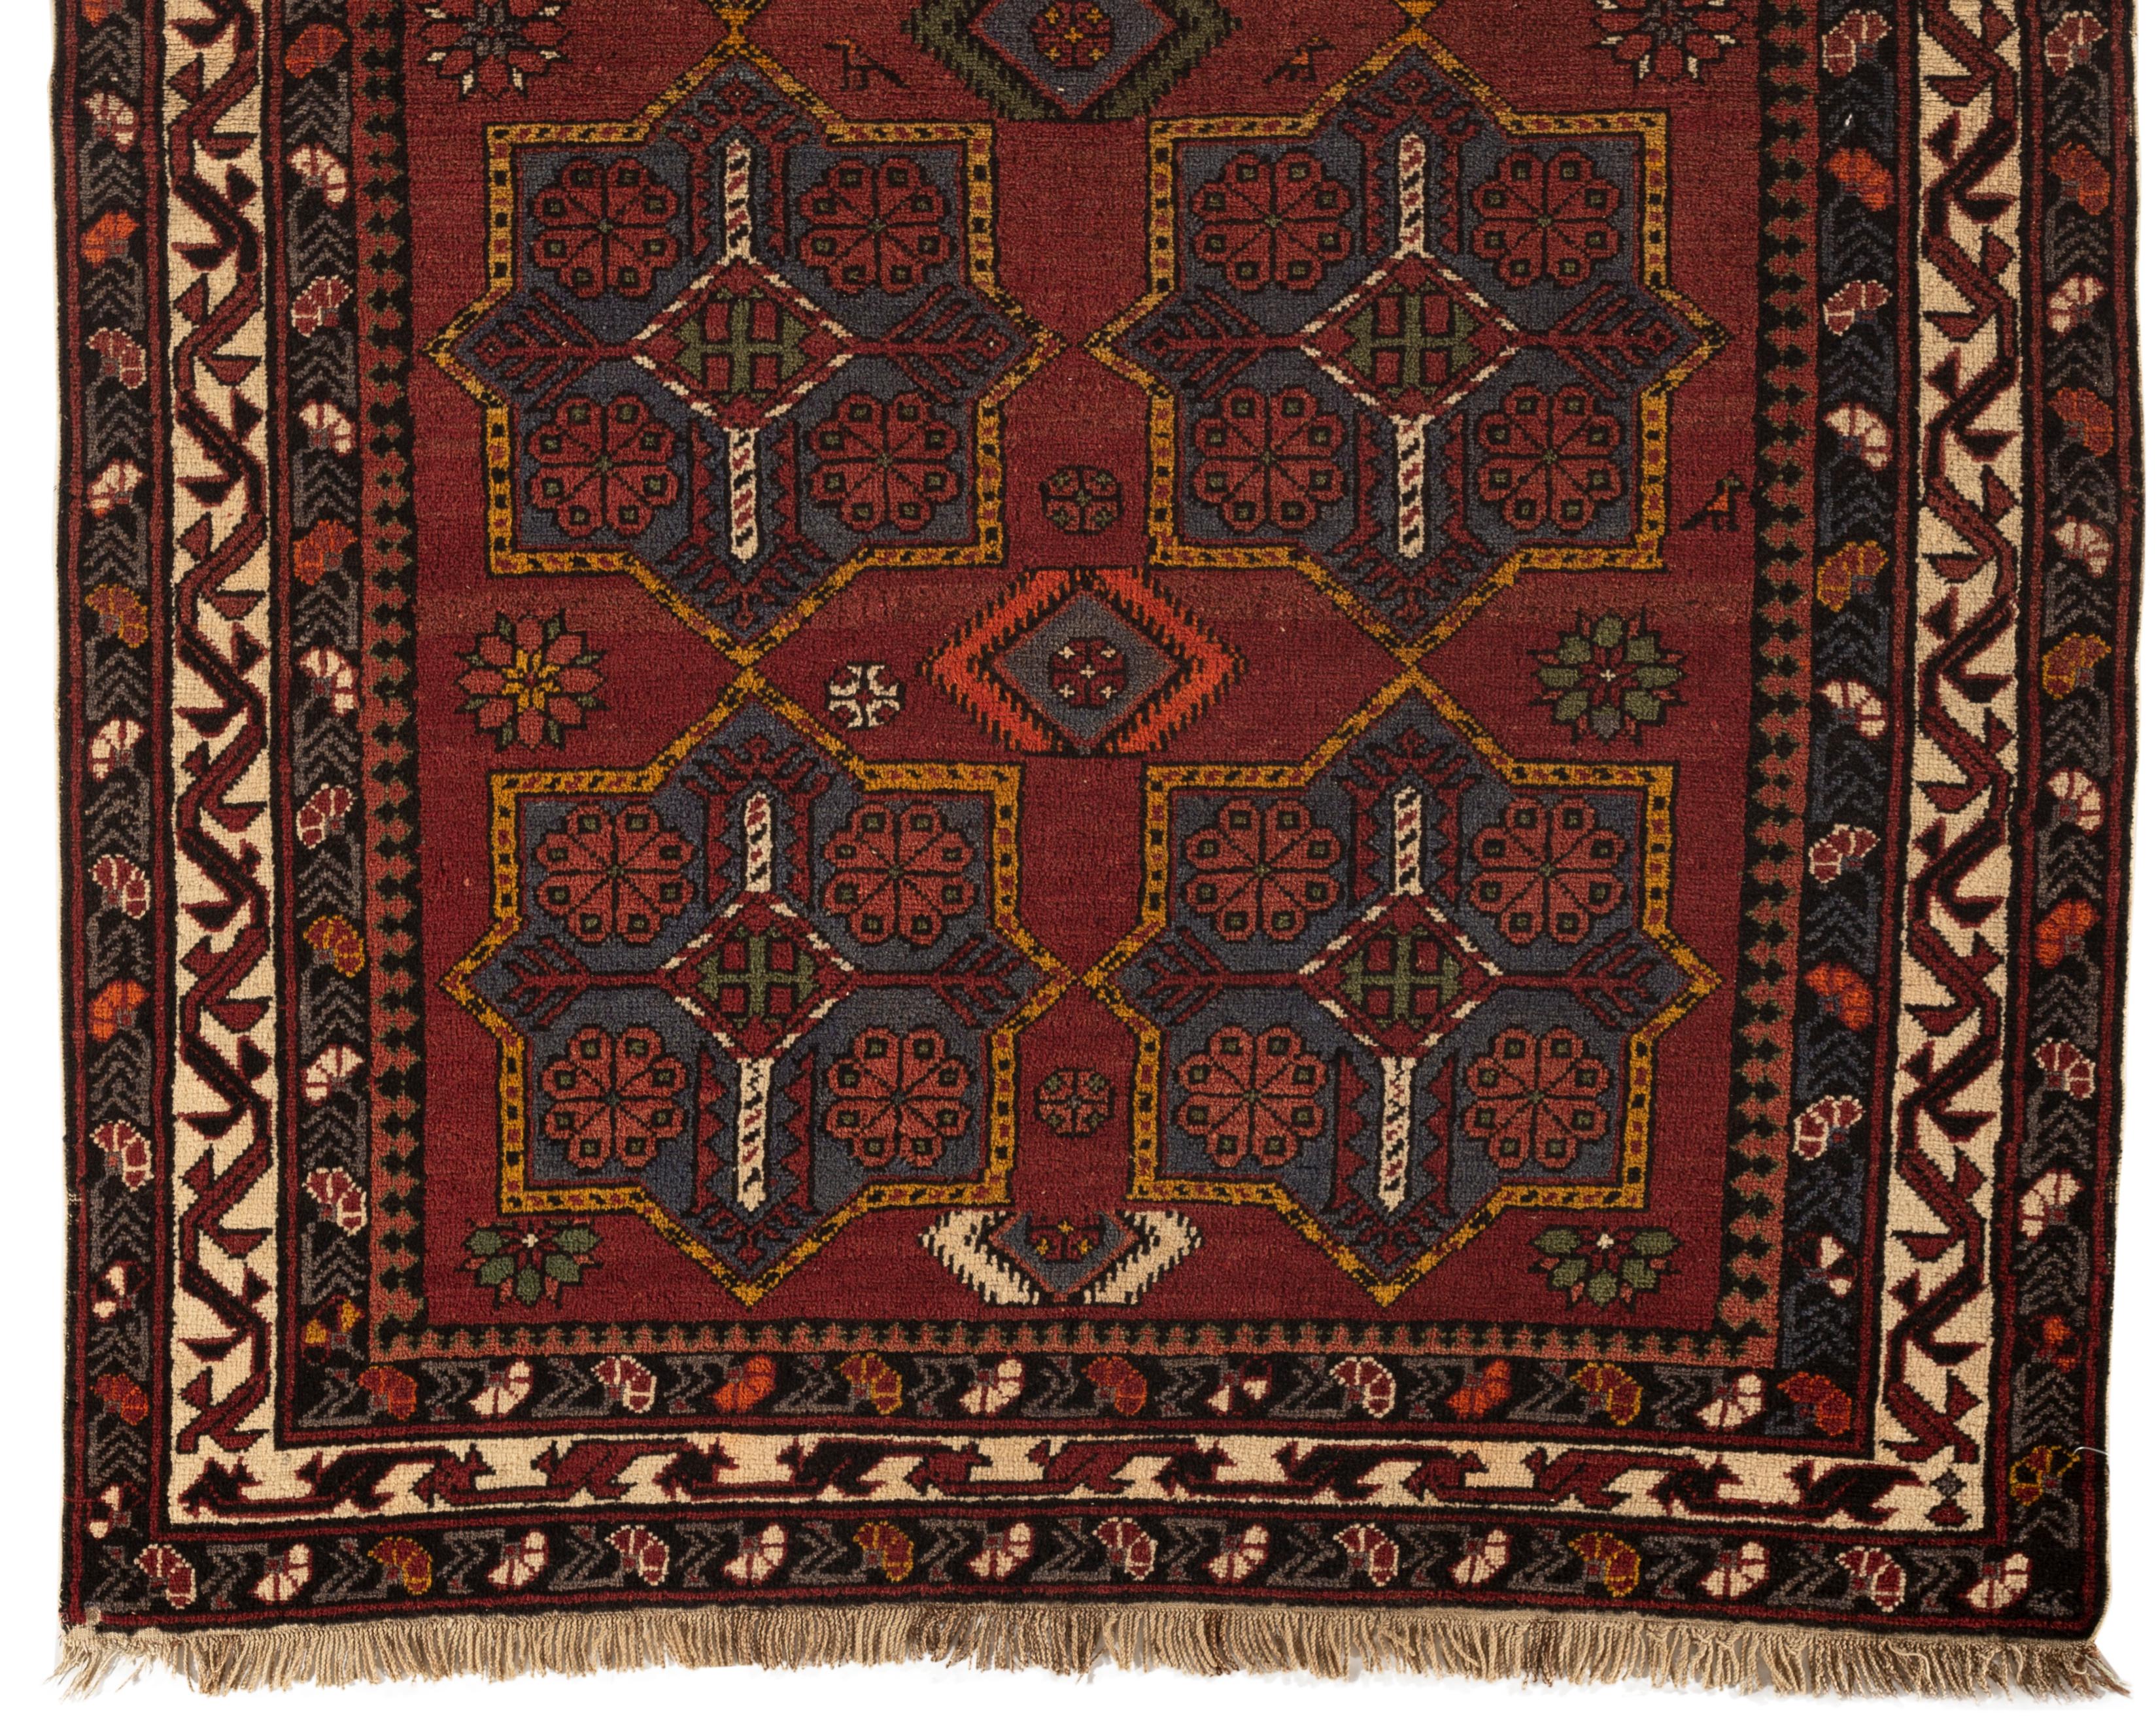 Antique Caucasian Shirvan rug, circa 1900. These types of antique Caucasian rugs were woven in the eastern part of the region, mostly along the west coast of the Caspian Sea. Size. 4'7 x 7'3.